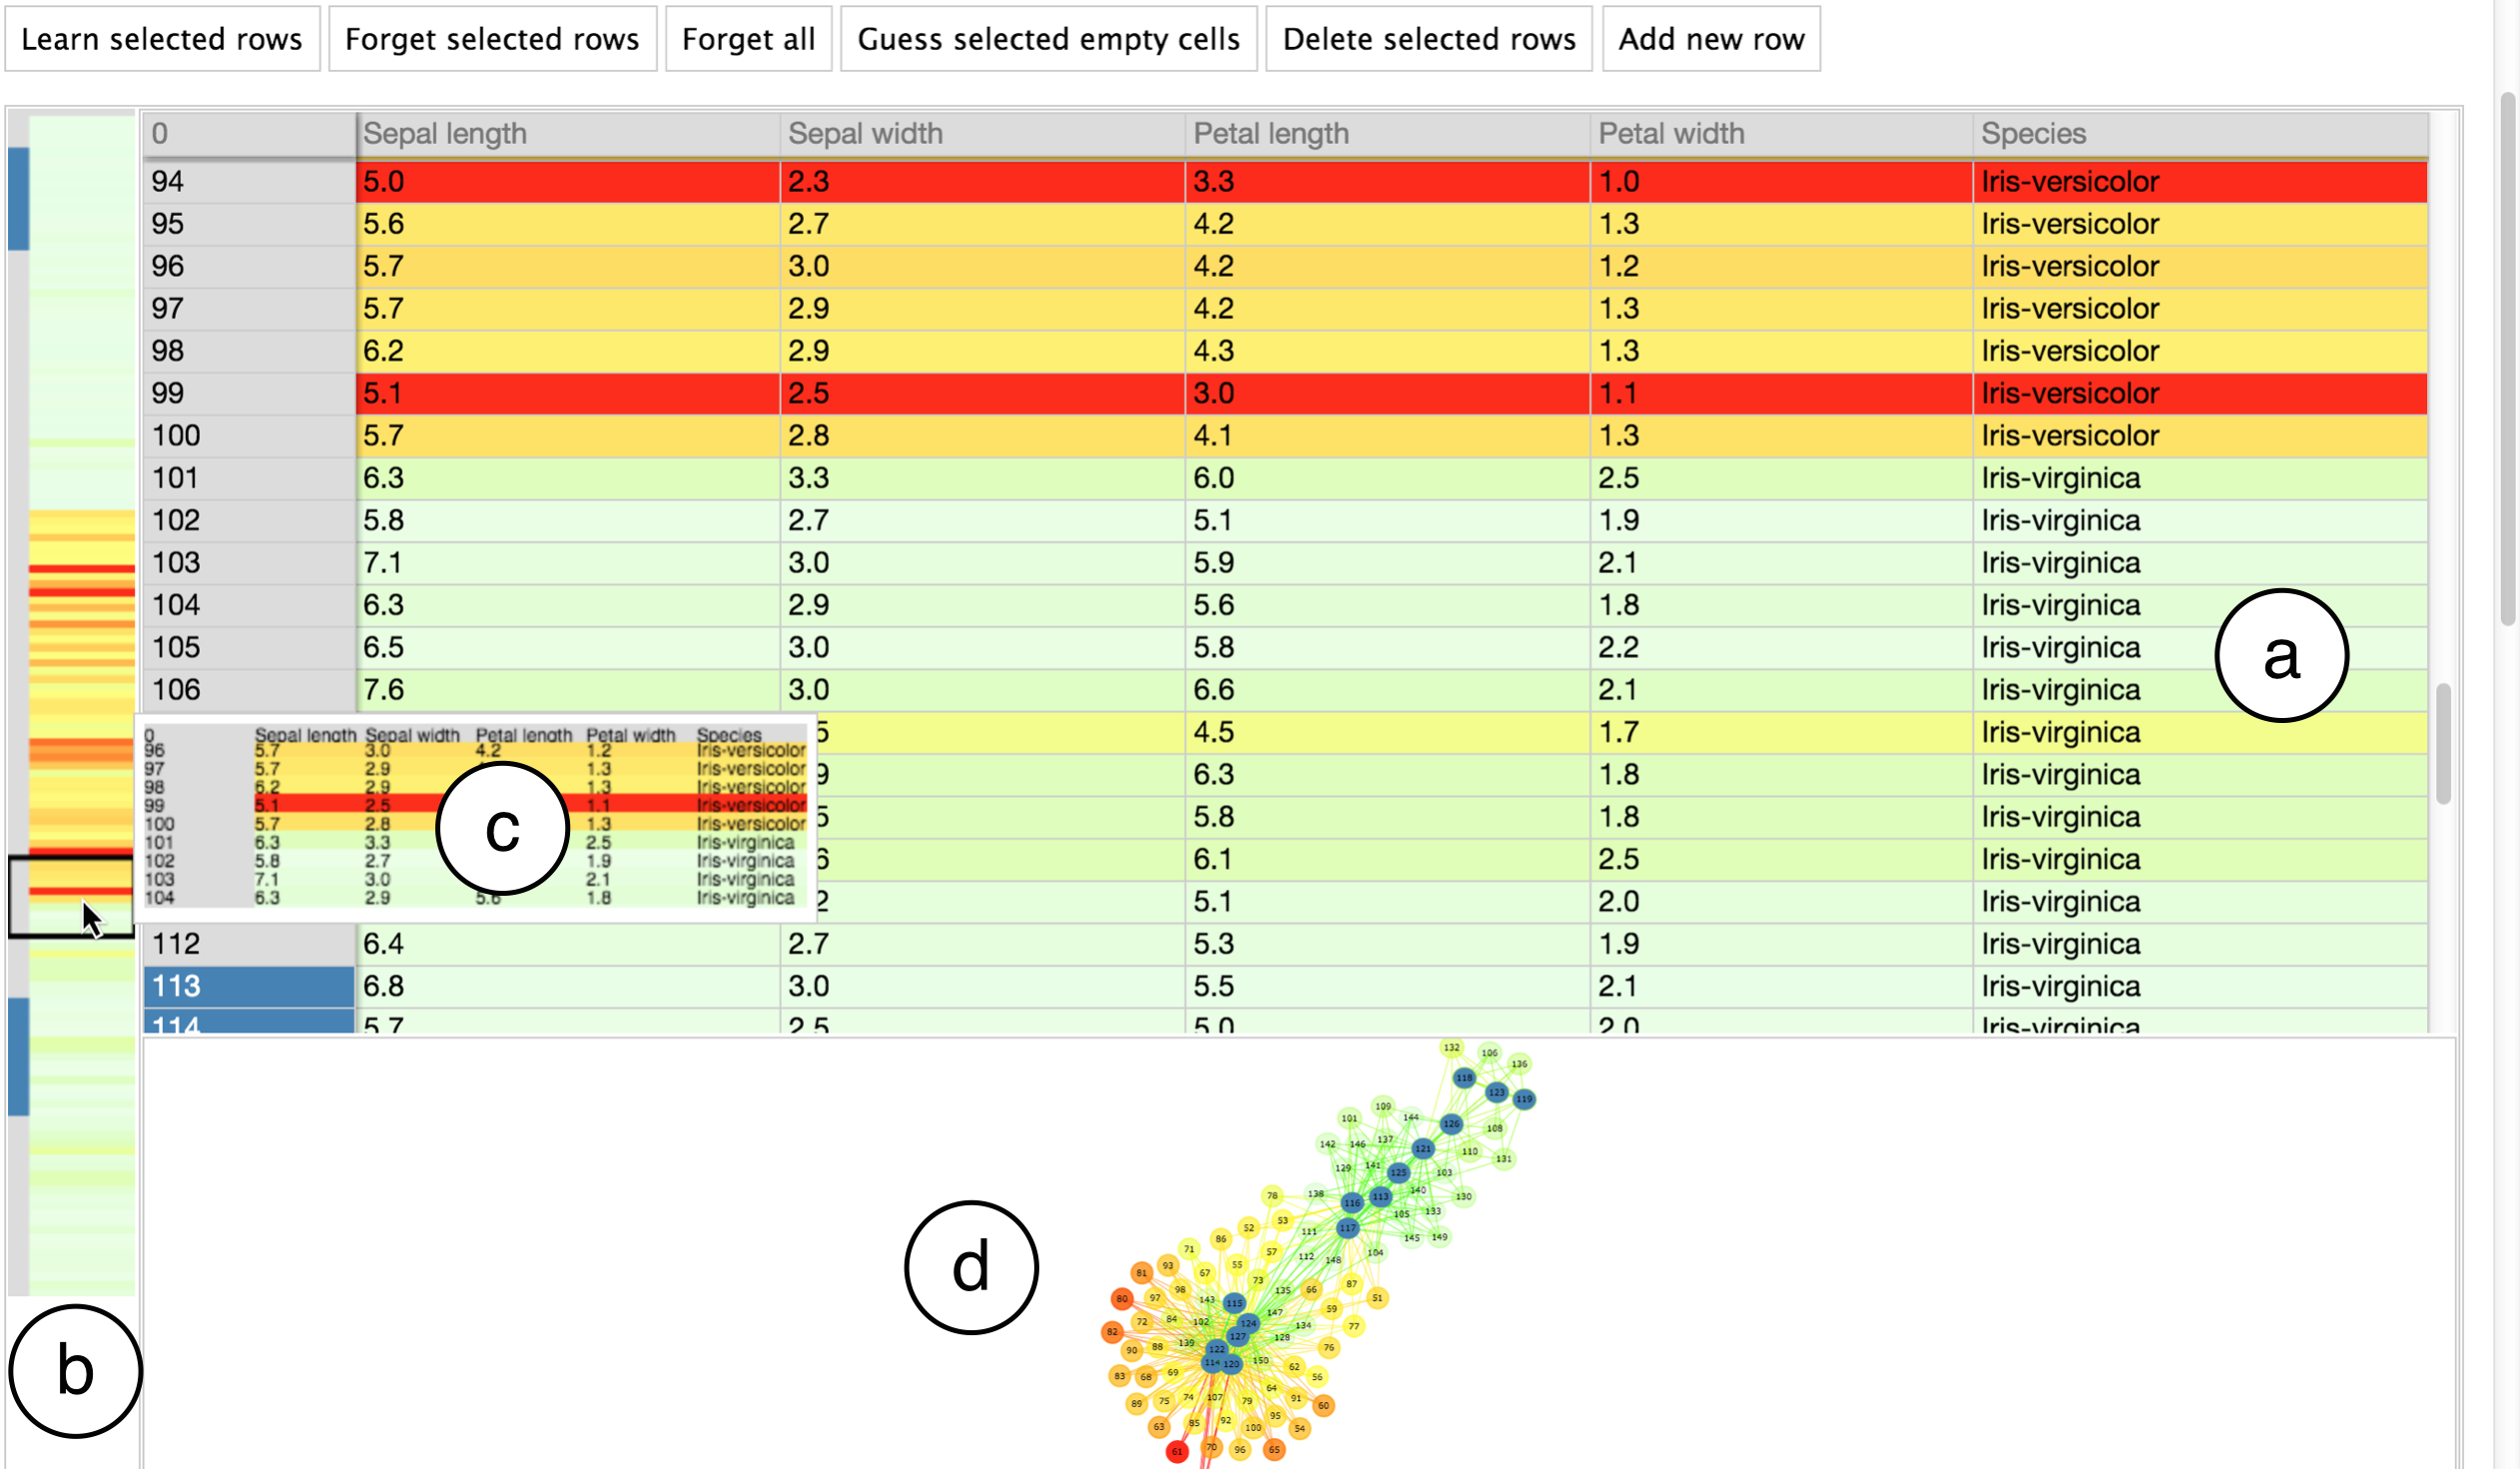 Fig. 1. Part of the BrainCel interface showing (a) the core spreadsheet, (b) the overview, (c) peeking at the spreadsheet contents, and (d) the explanatory
  network visualisation. Rows with row numbers coloured blue have been added by the user to the training set, and all rows have been coloured according to the
  model’s confidence. Other parts of the interface, such as the distributions in Fig. 2 and the progress graphs in Fig. 4, are visible upon scrolling down.